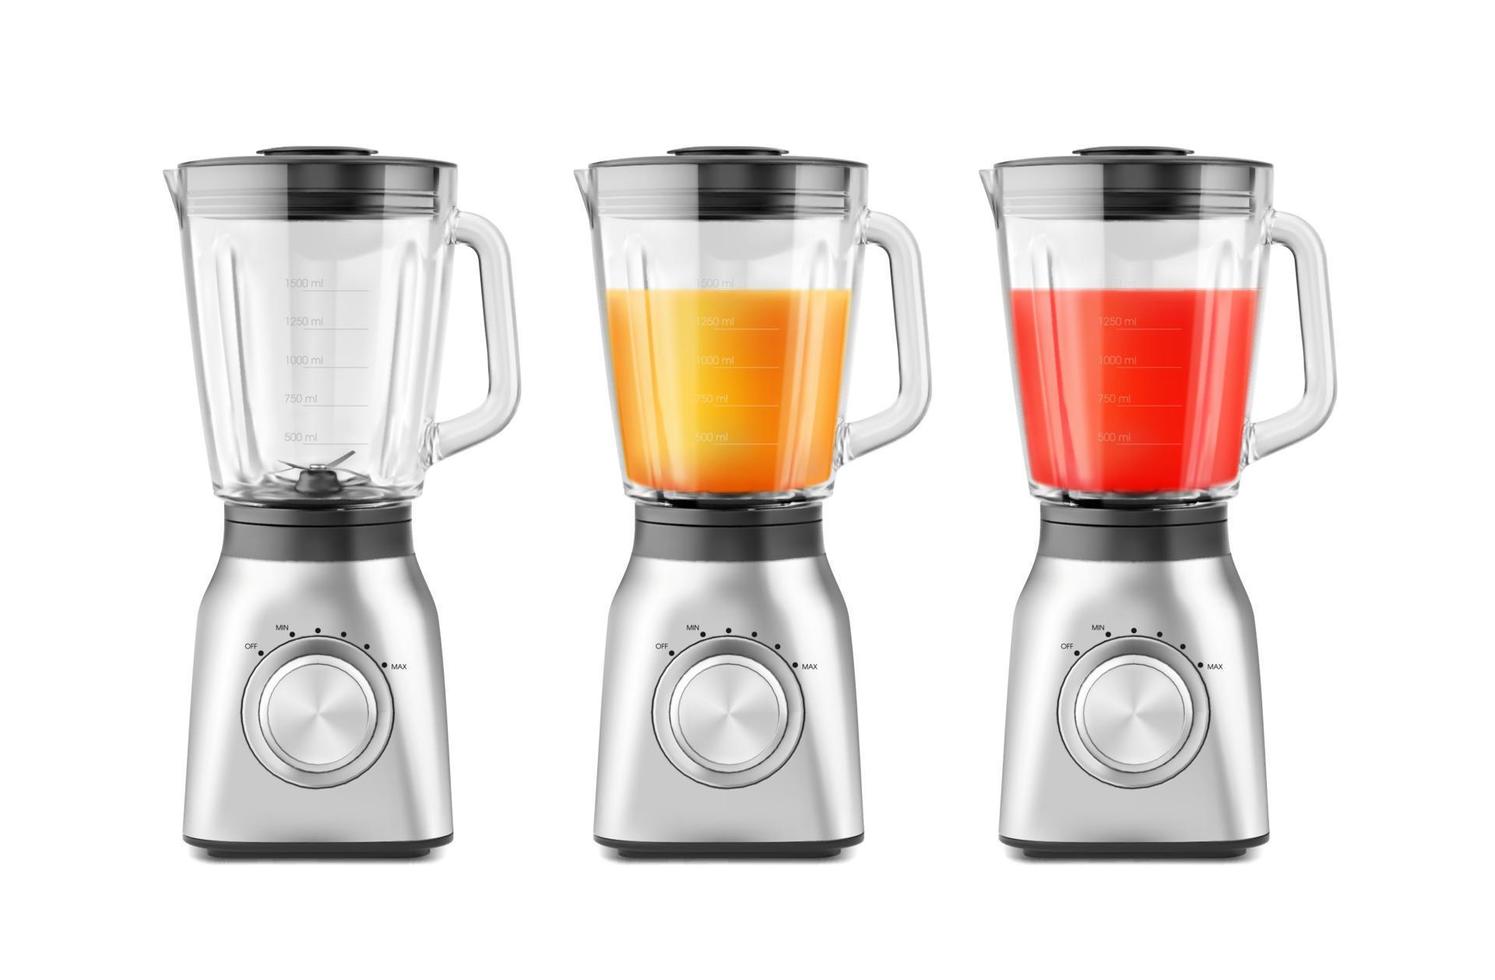 Realistic isolated juicer, kitchen mixer blender vector